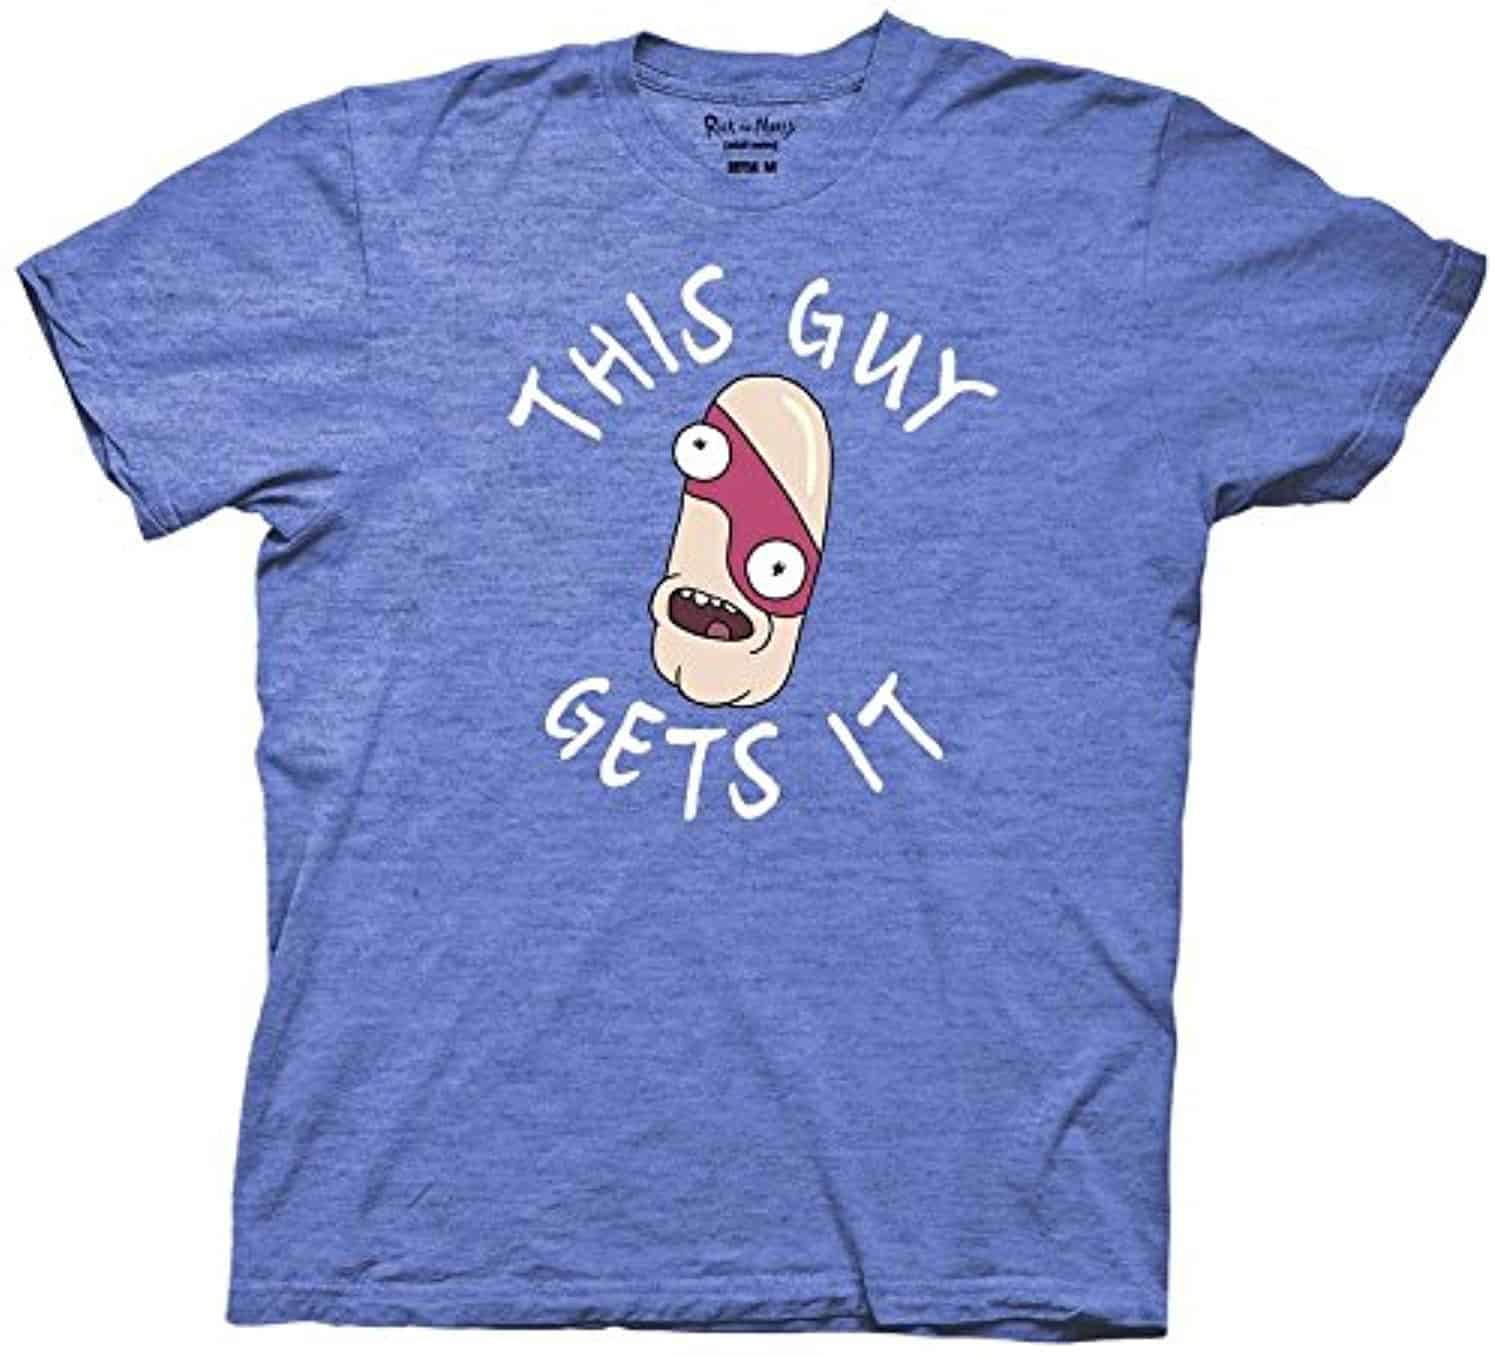 Shop Rick and Morty This Guy Gets It Crew T-Shirt anime